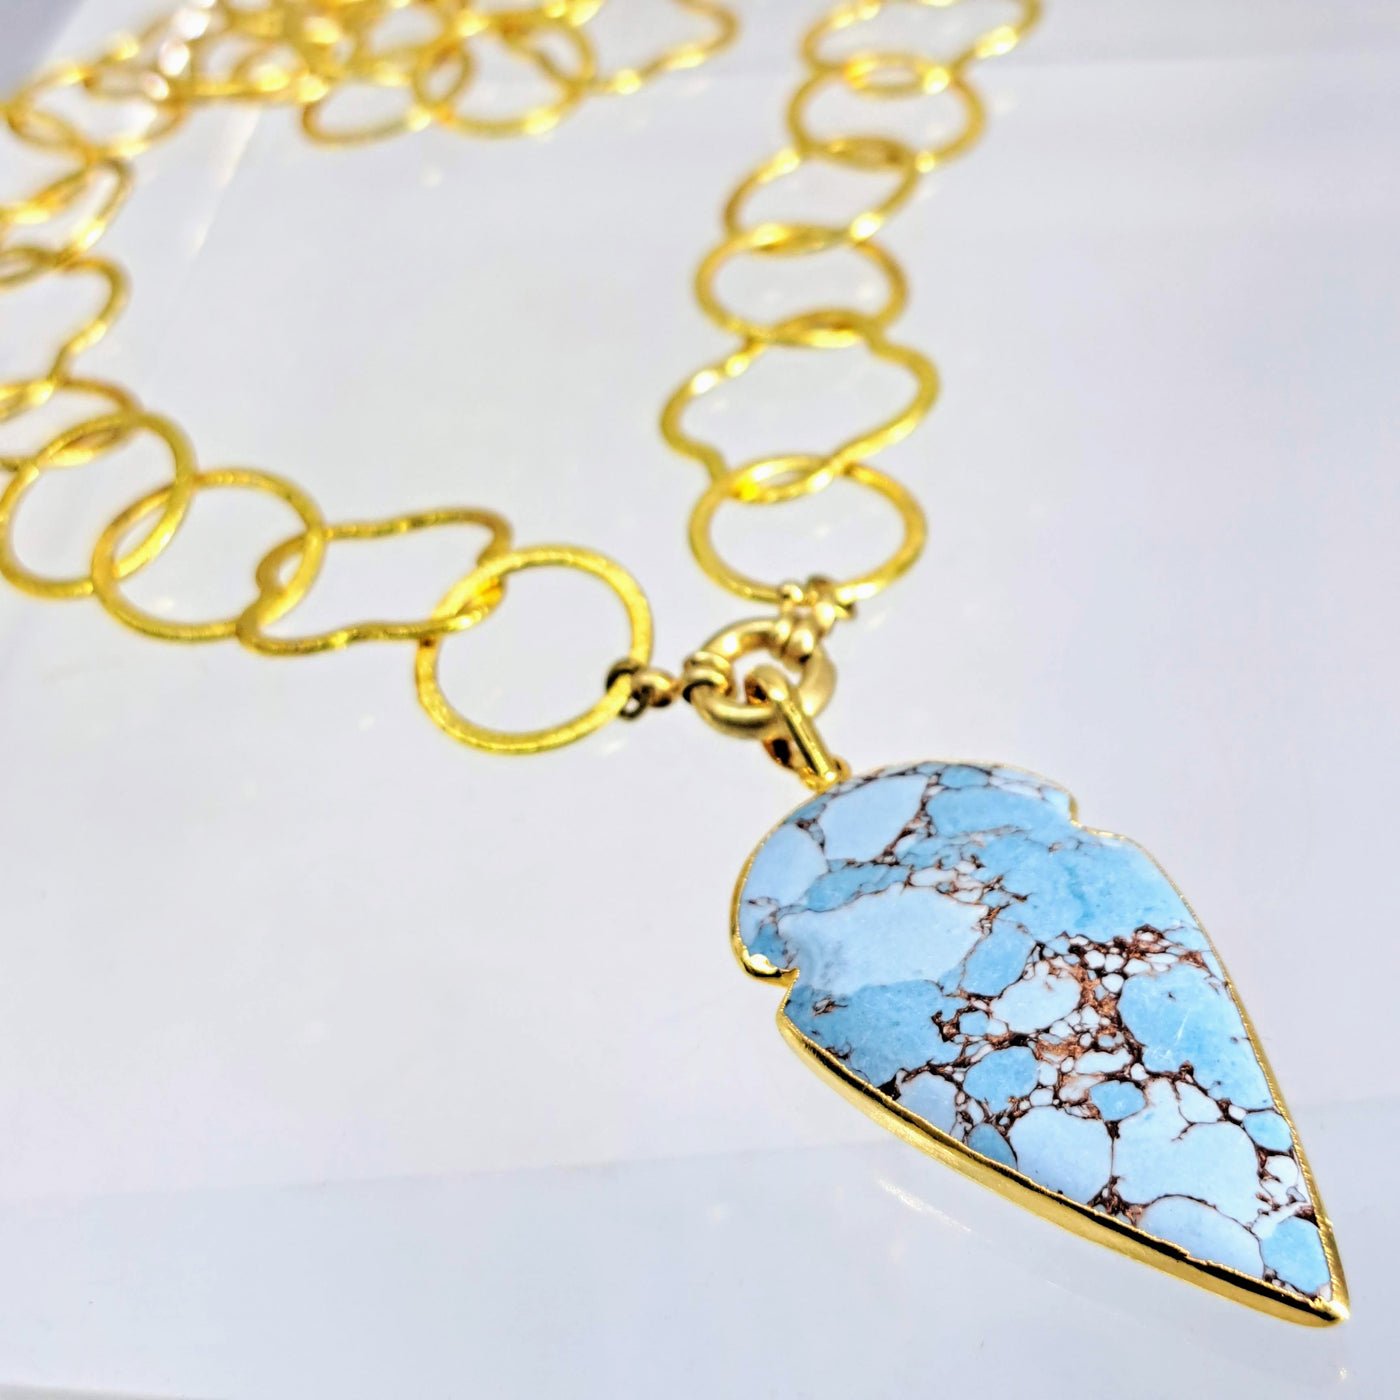 "Clover & Cloud" 20" Reversible/Convertible Necklace - Gold-plated Jeweler's Brass, Copper Turquoise